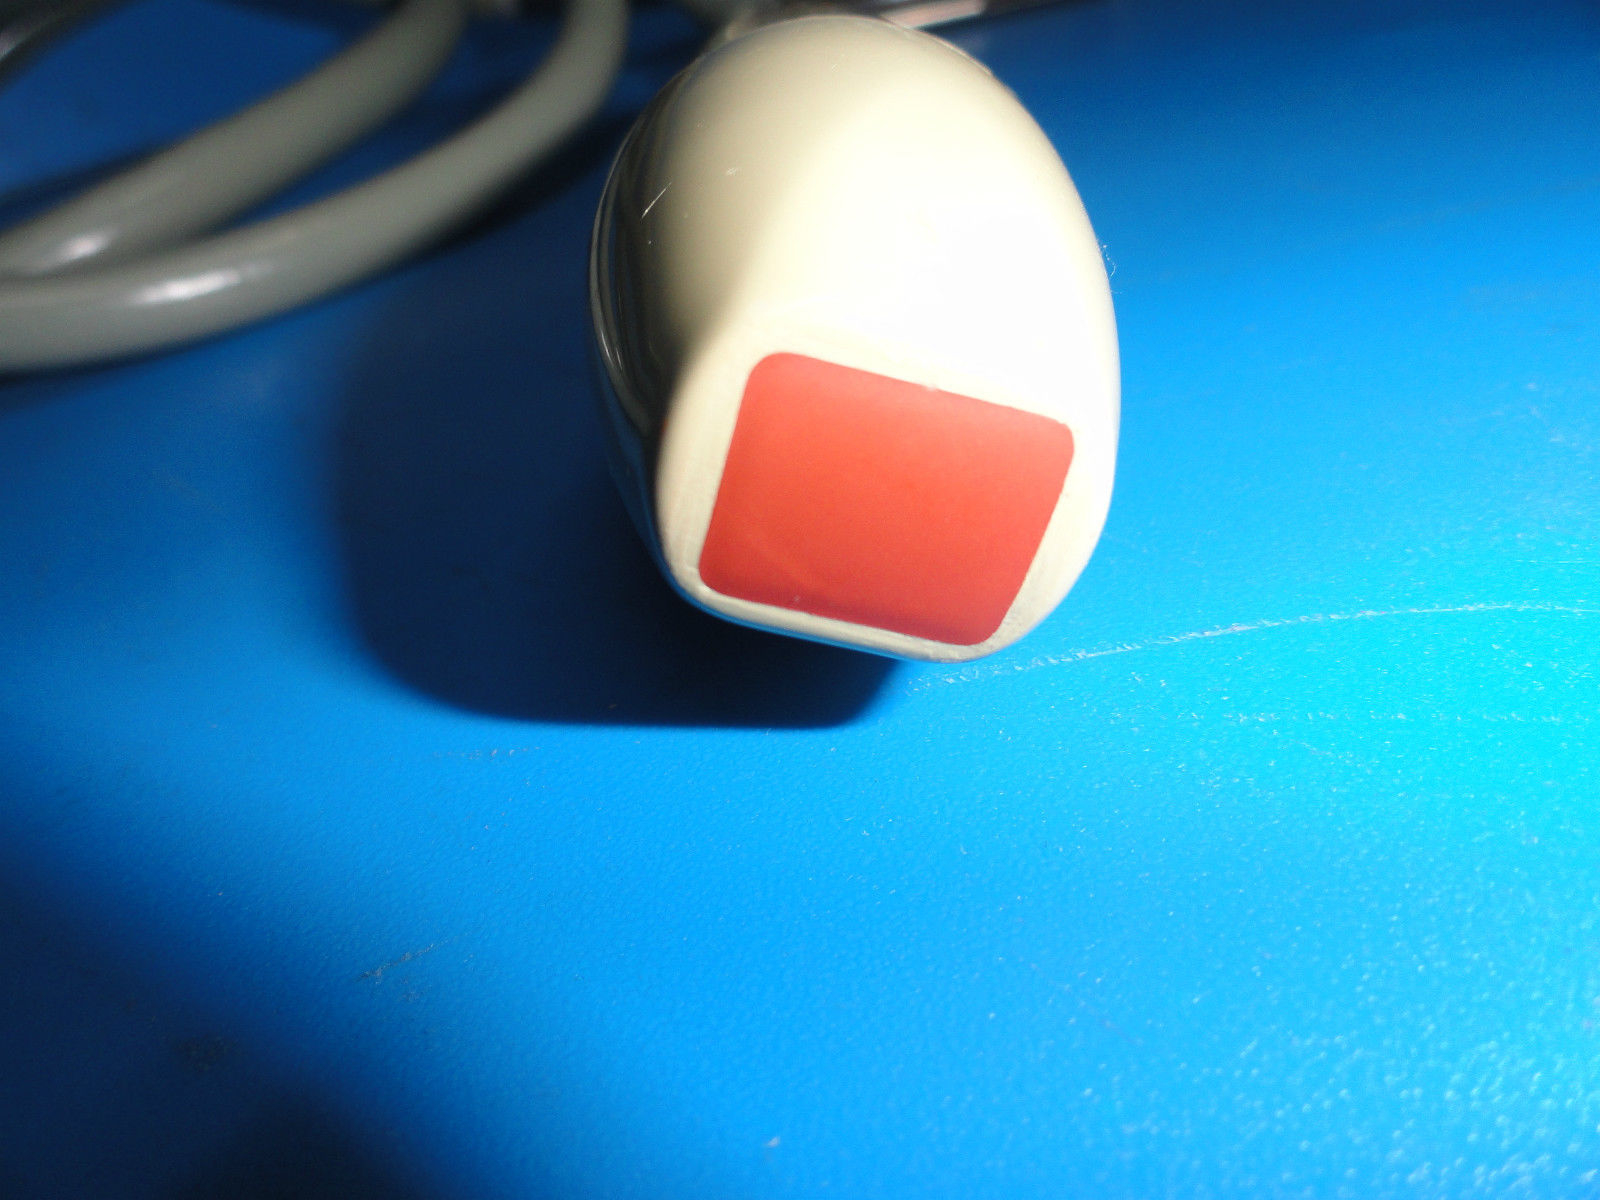 a red and white object sitting on top of a blue surface